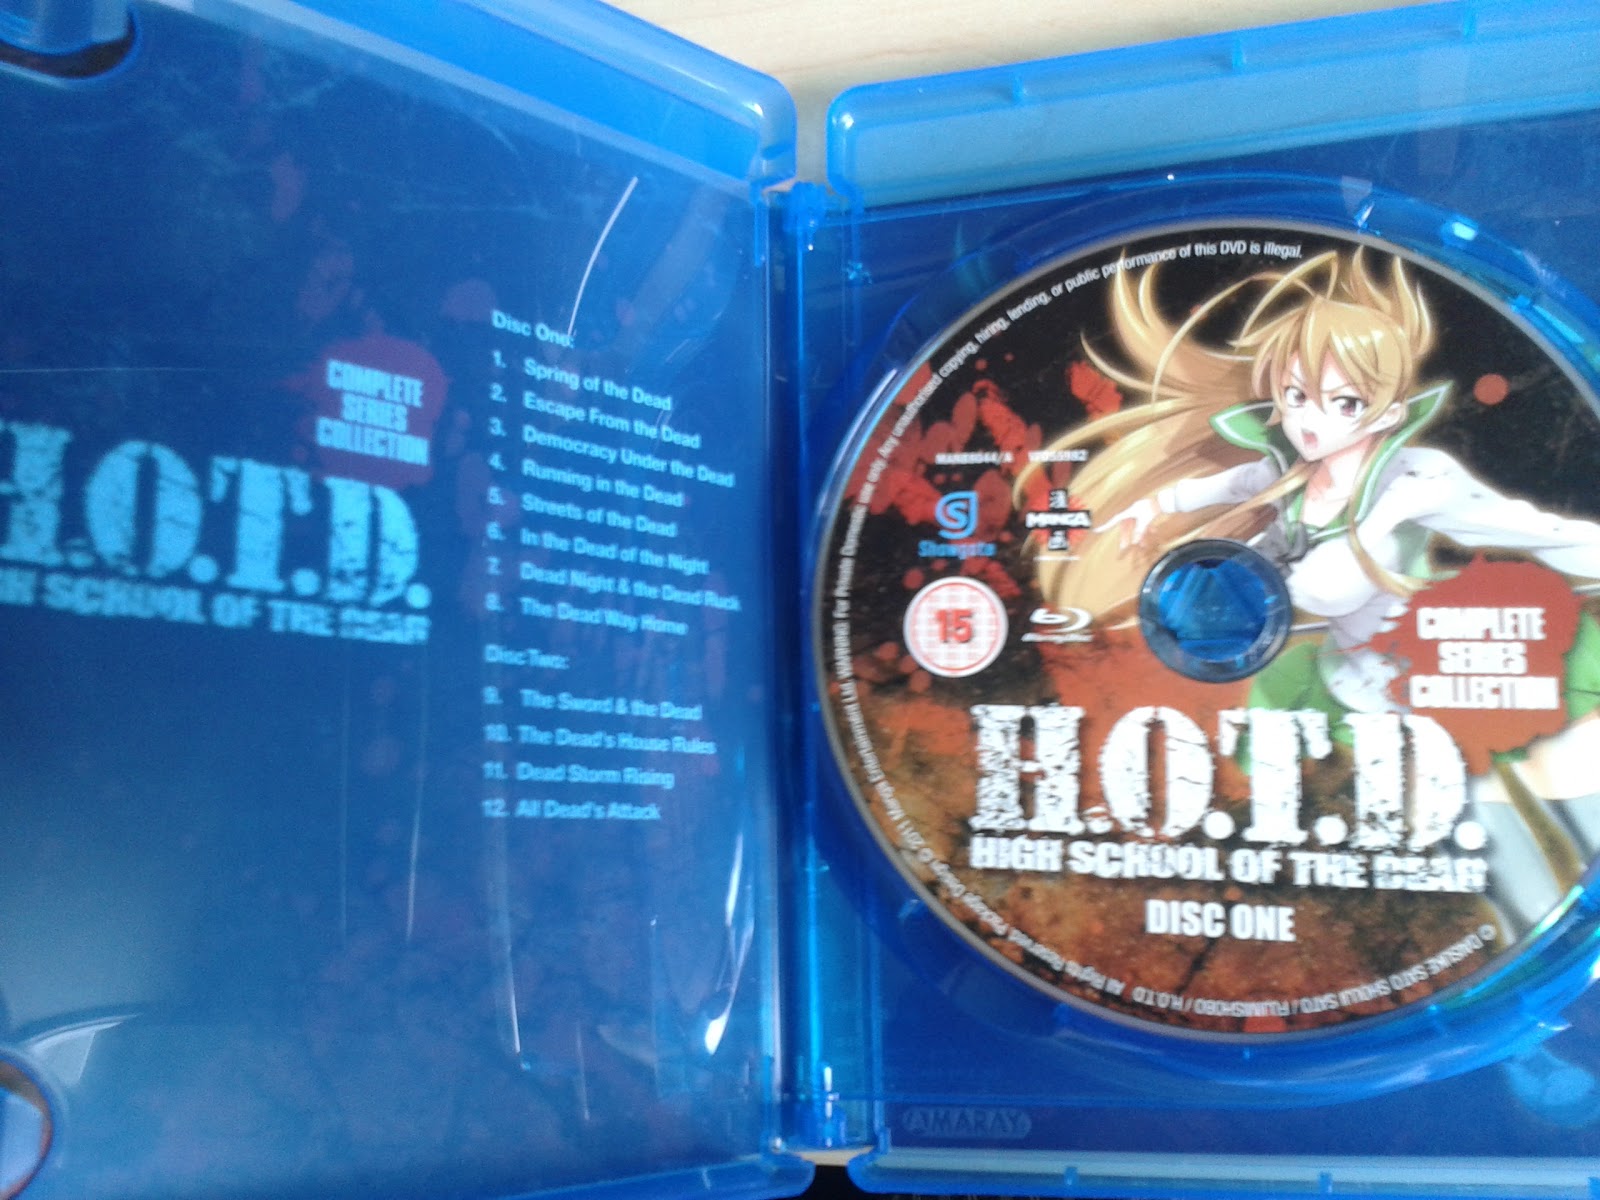 High School of the Dead: Complete TV Series Collection (Blu-ray